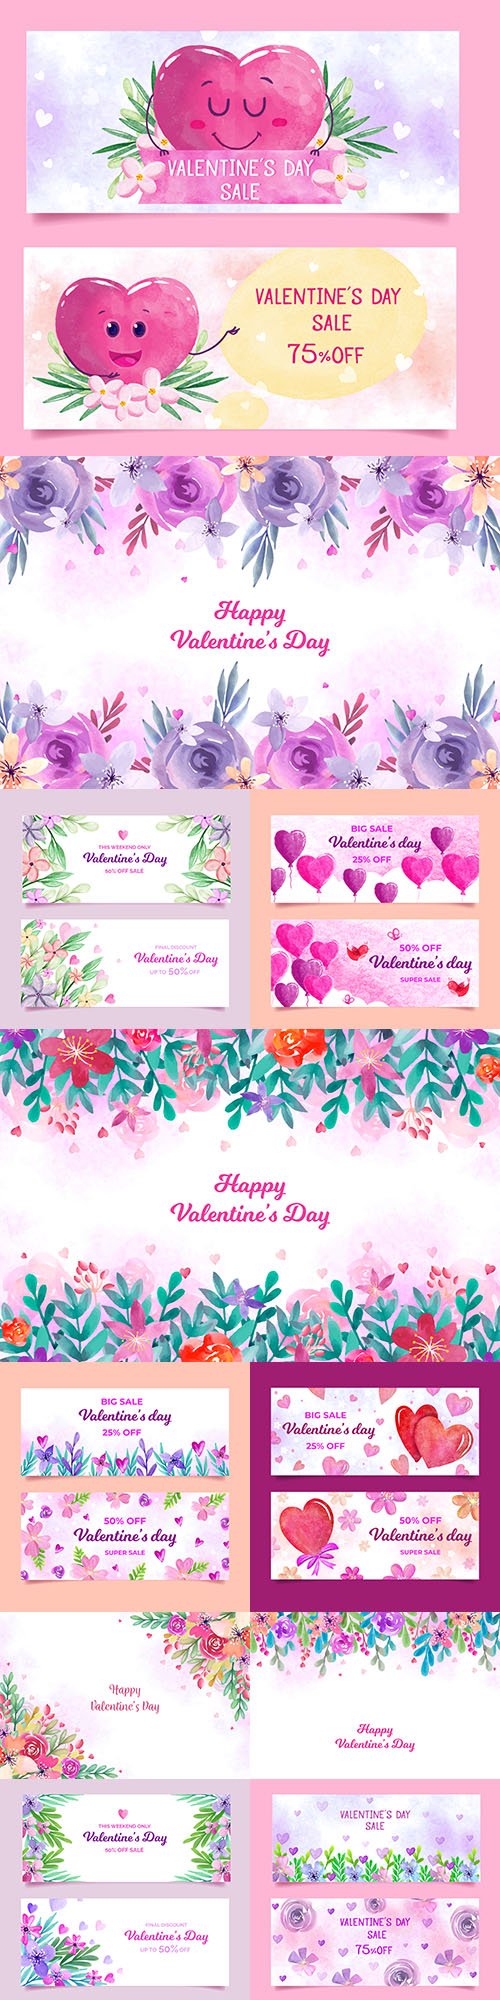 Valentine's Day background and banner watercolor design